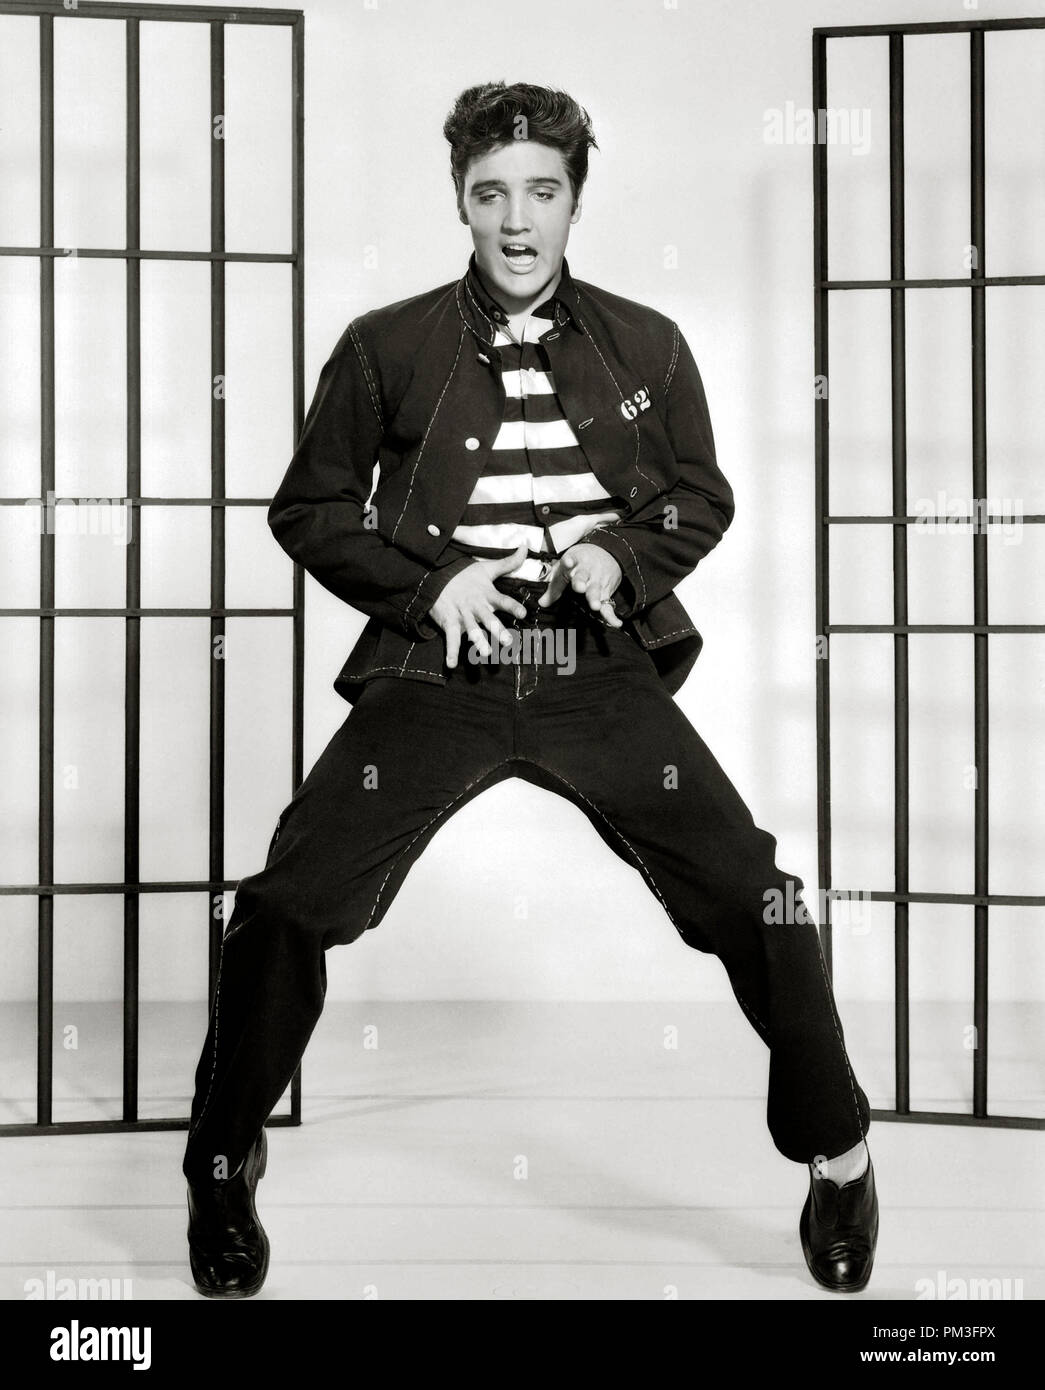 Elvis Jailhouse Rock High Resolution Stock Photography And Images Alamy